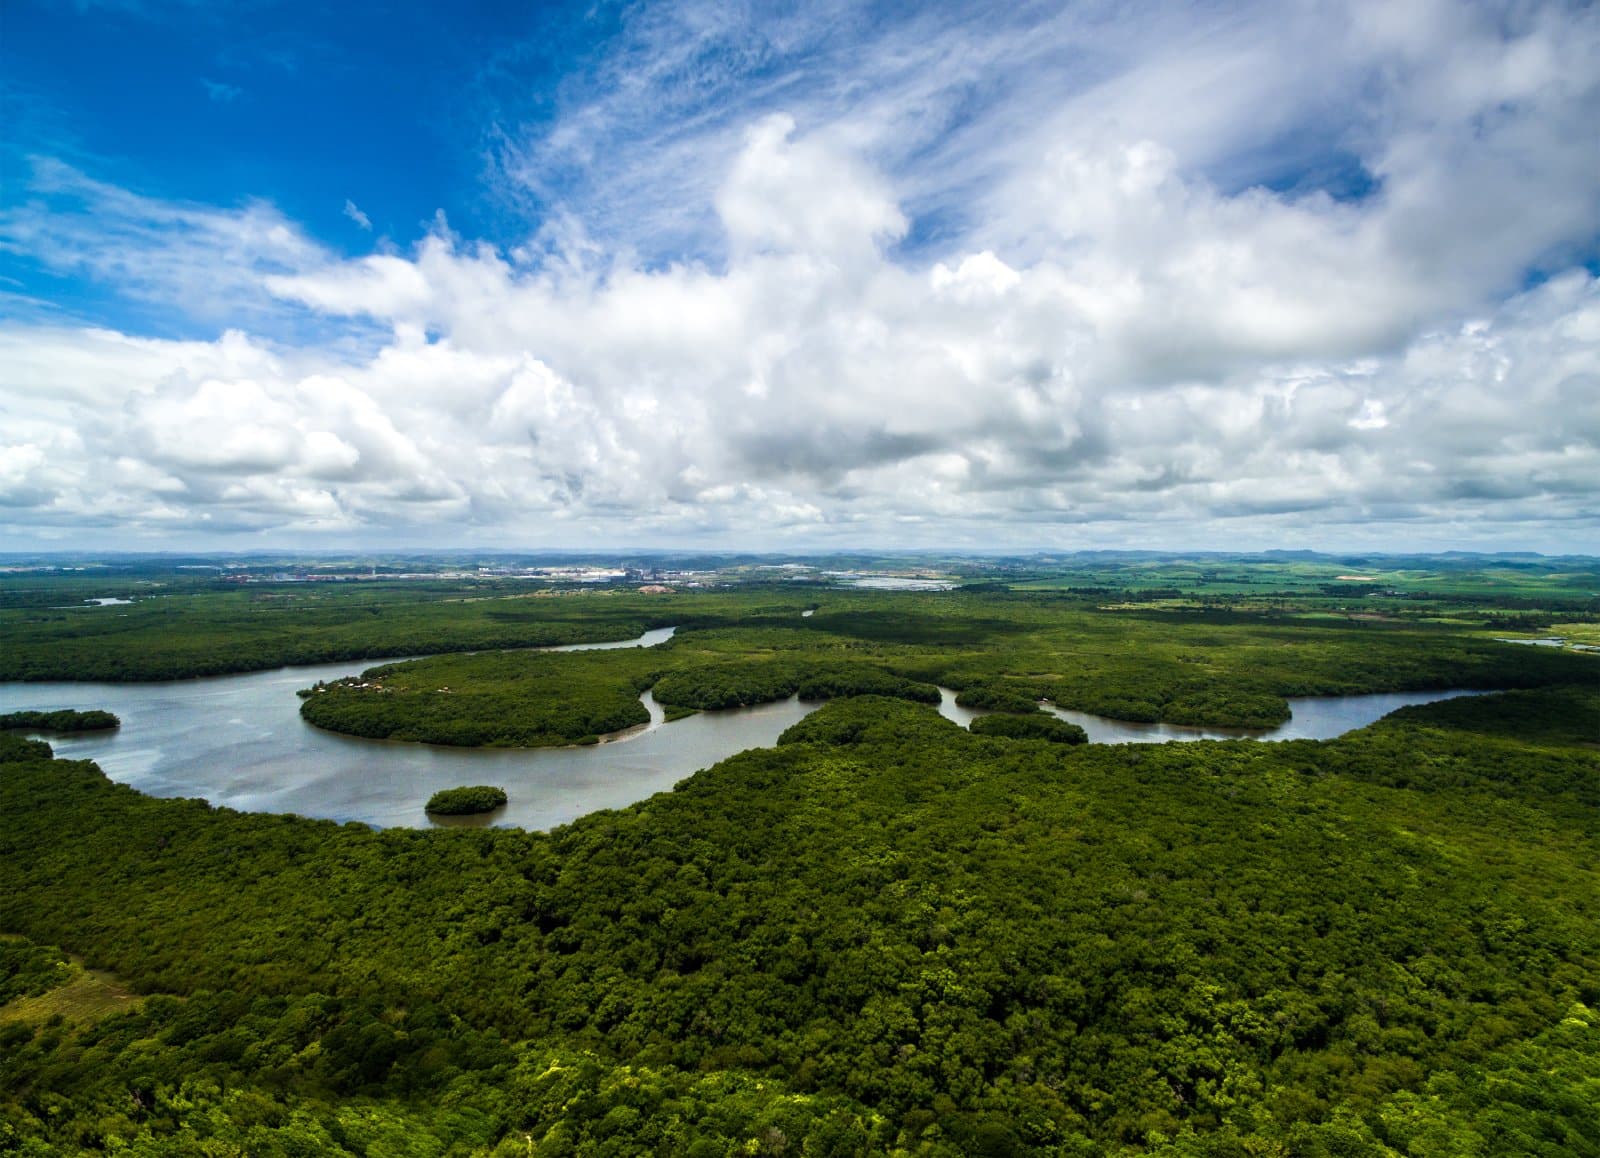 <p class="wp-caption-text">Image Credit: Shutterstock / Gustavo Frazao</p>  <p><span>Manaus, the capital of the Amazonas state in Brazil, stands as a historical and cultural hub amidst the dense Amazon Rainforest. Beyond its urban facade, Manaus offers pathways to shamanic experiences within the surrounding jungle, where the rich biodiversity of the Amazon supports a plethora of medicinal plants used in traditional healing practices.</span></p>